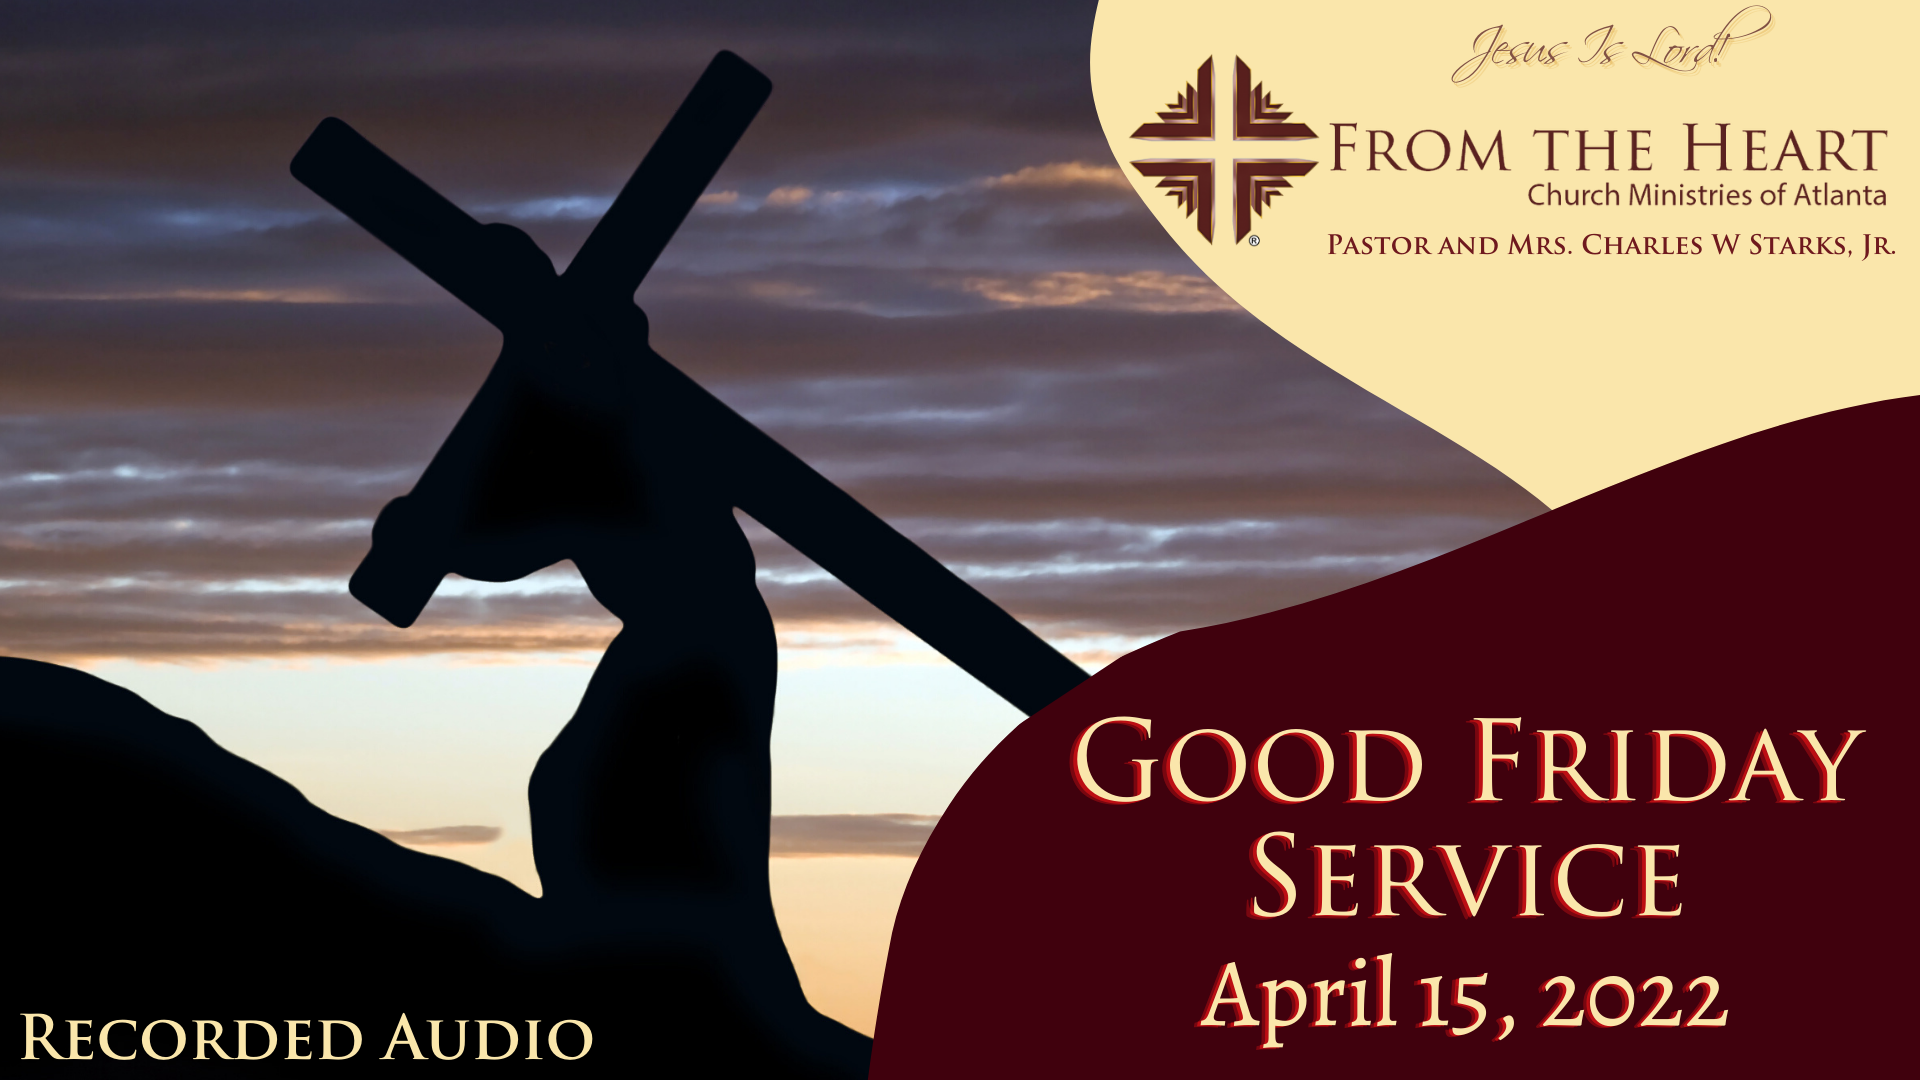 Good Friday Service audio recording - From the Heart Church Ministries of Atlanta